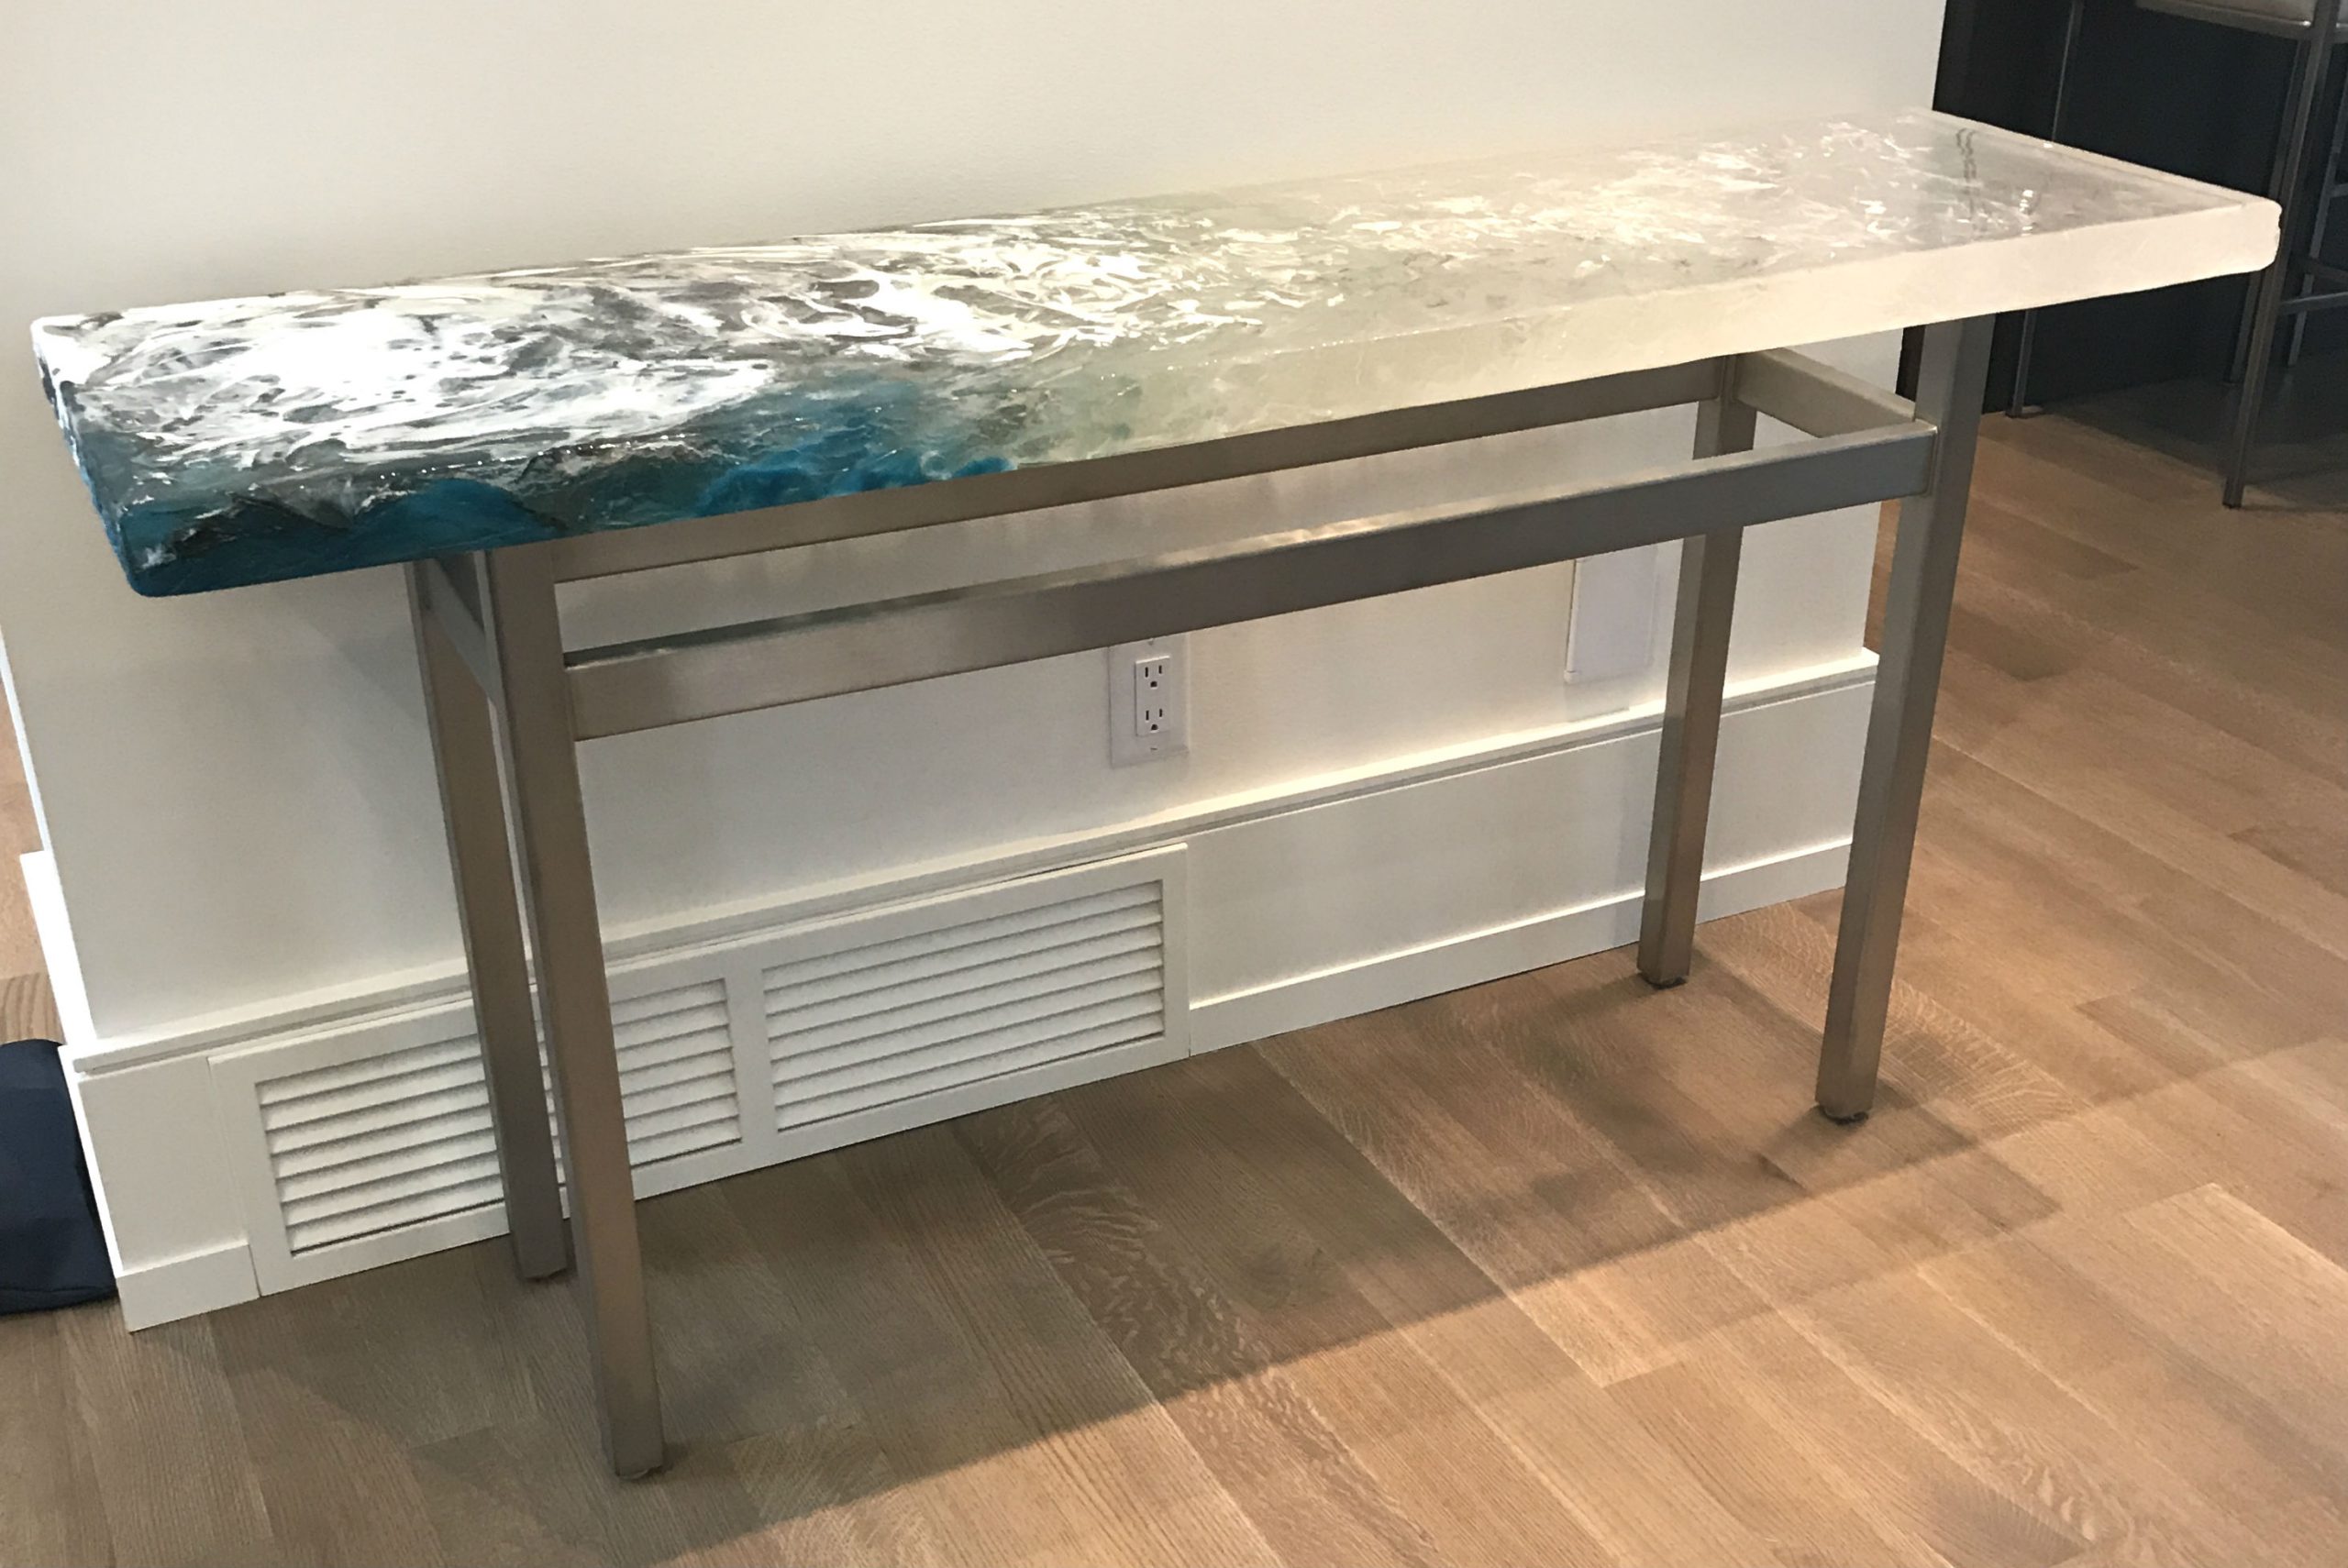 Custom cast glass console table by Heather Cuell